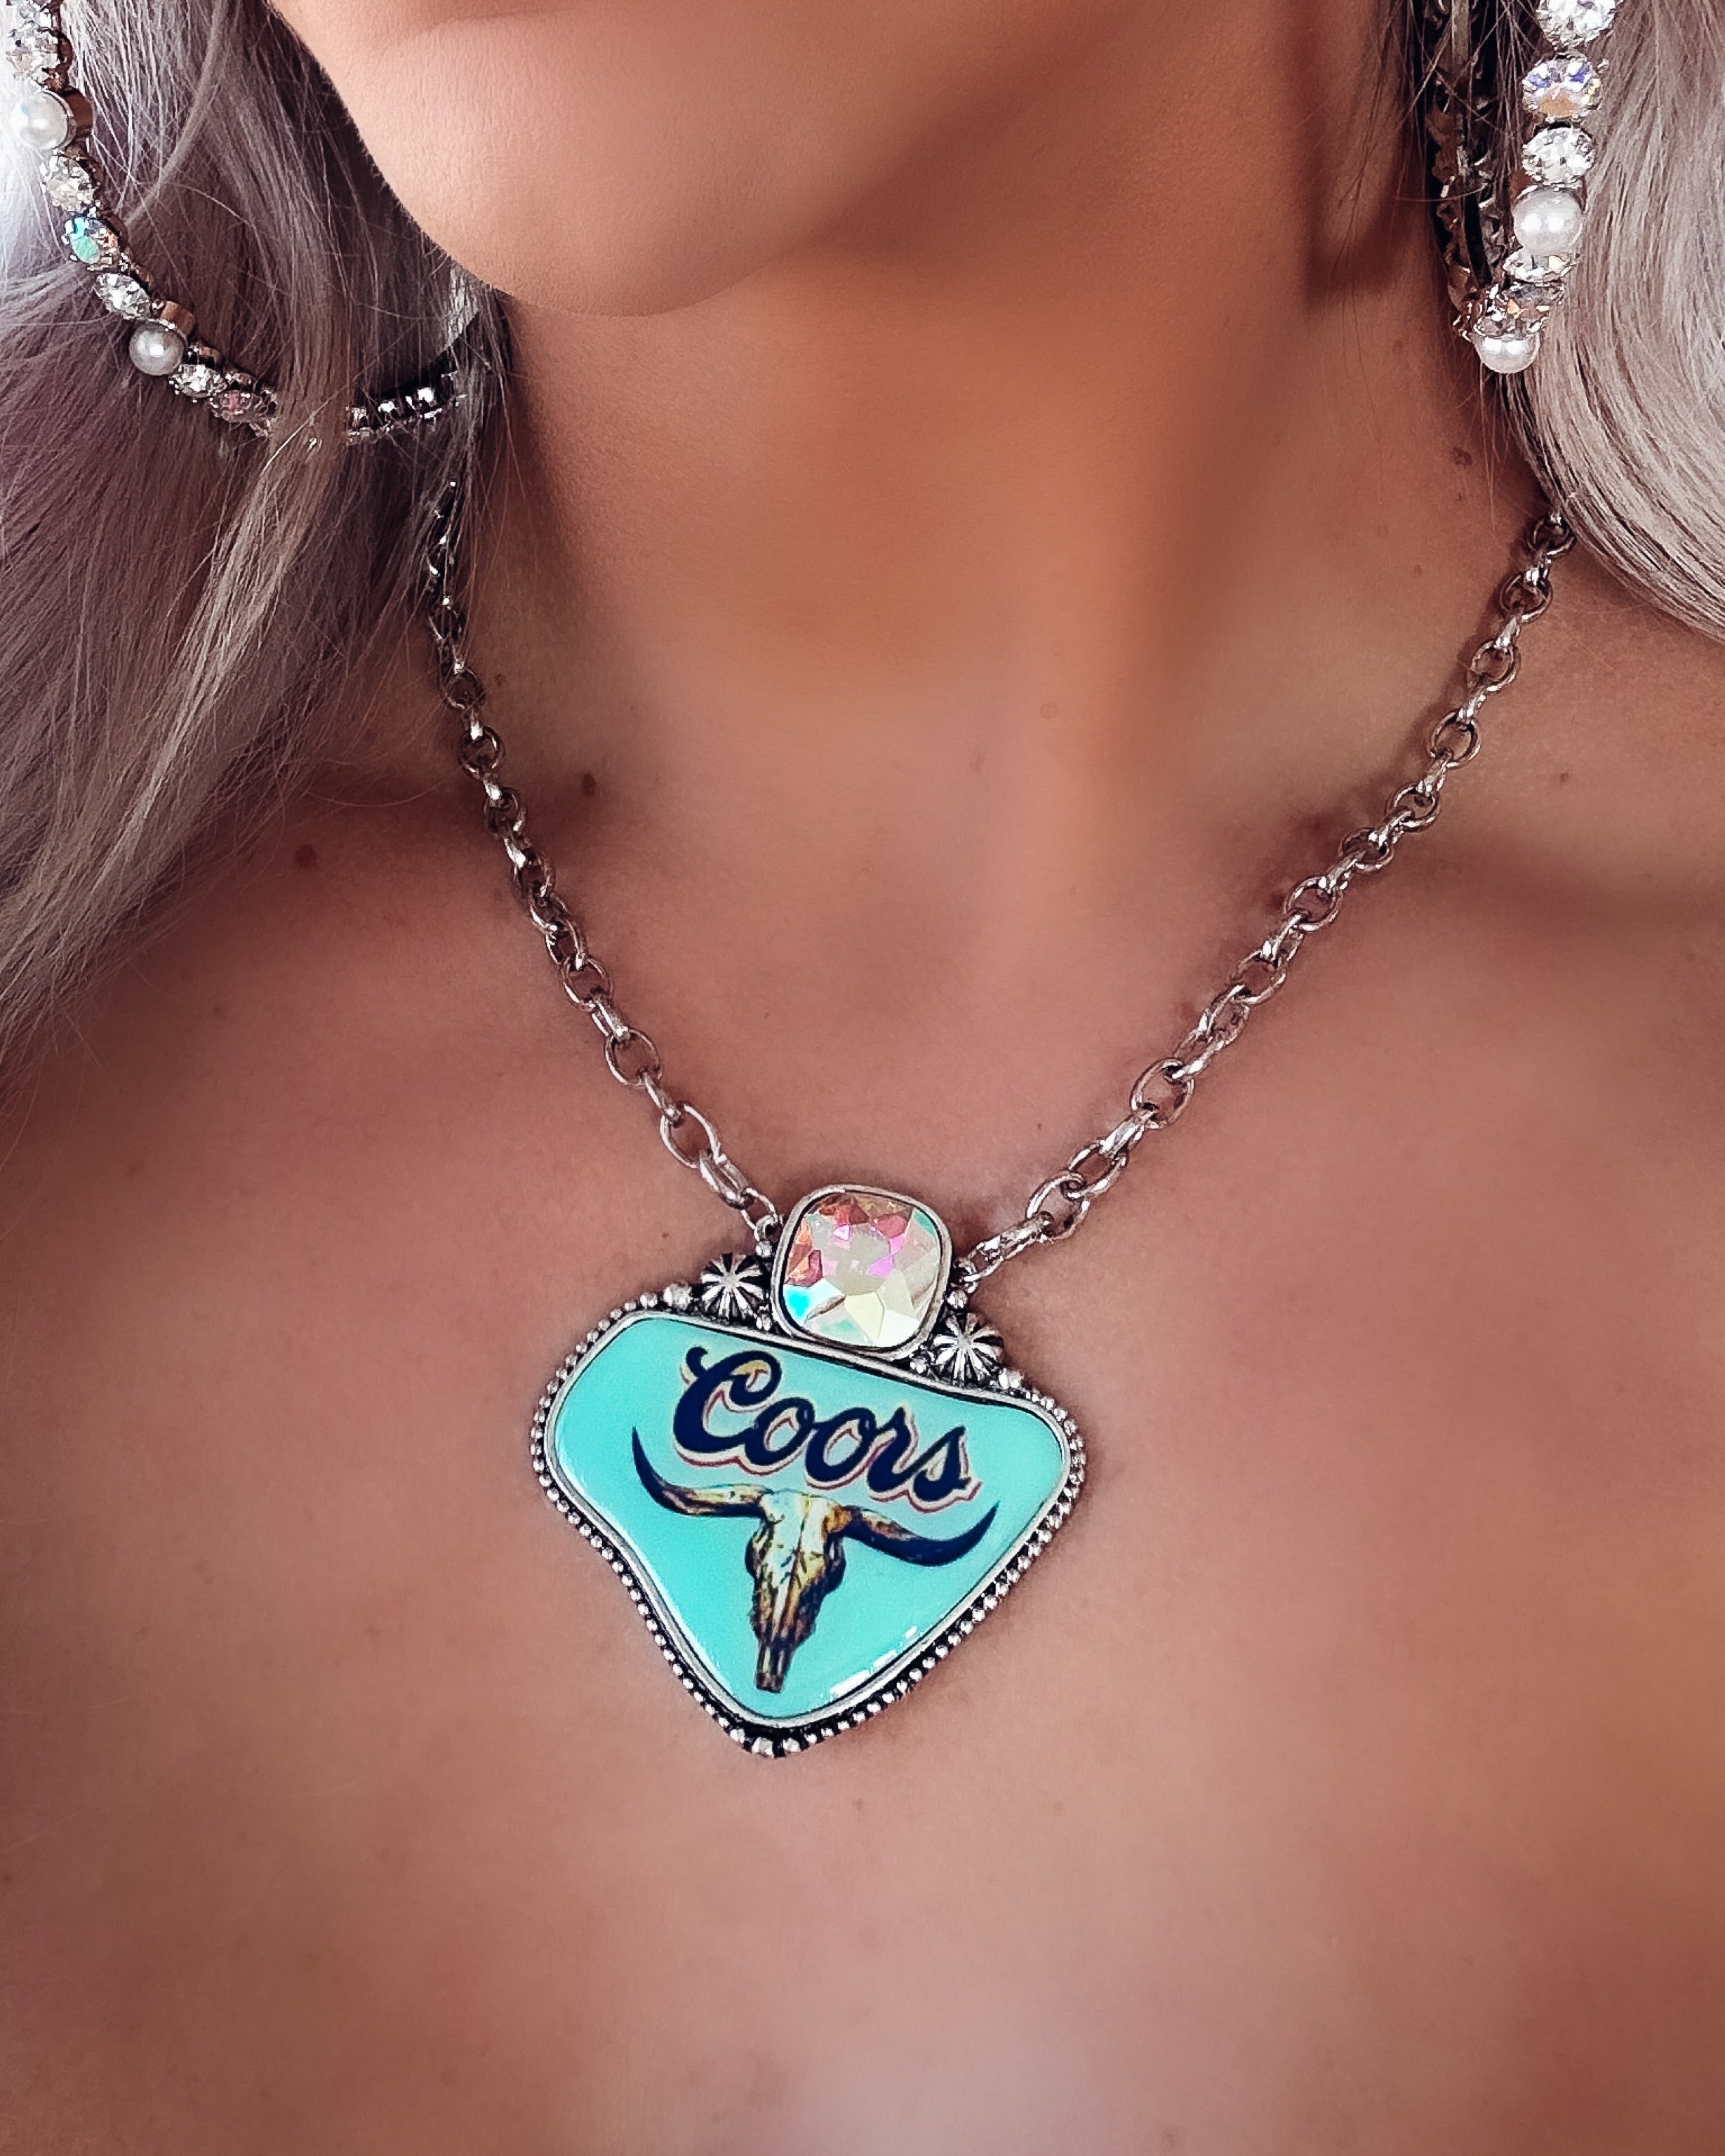 Coors AB Pendant Necklace - Turquoise